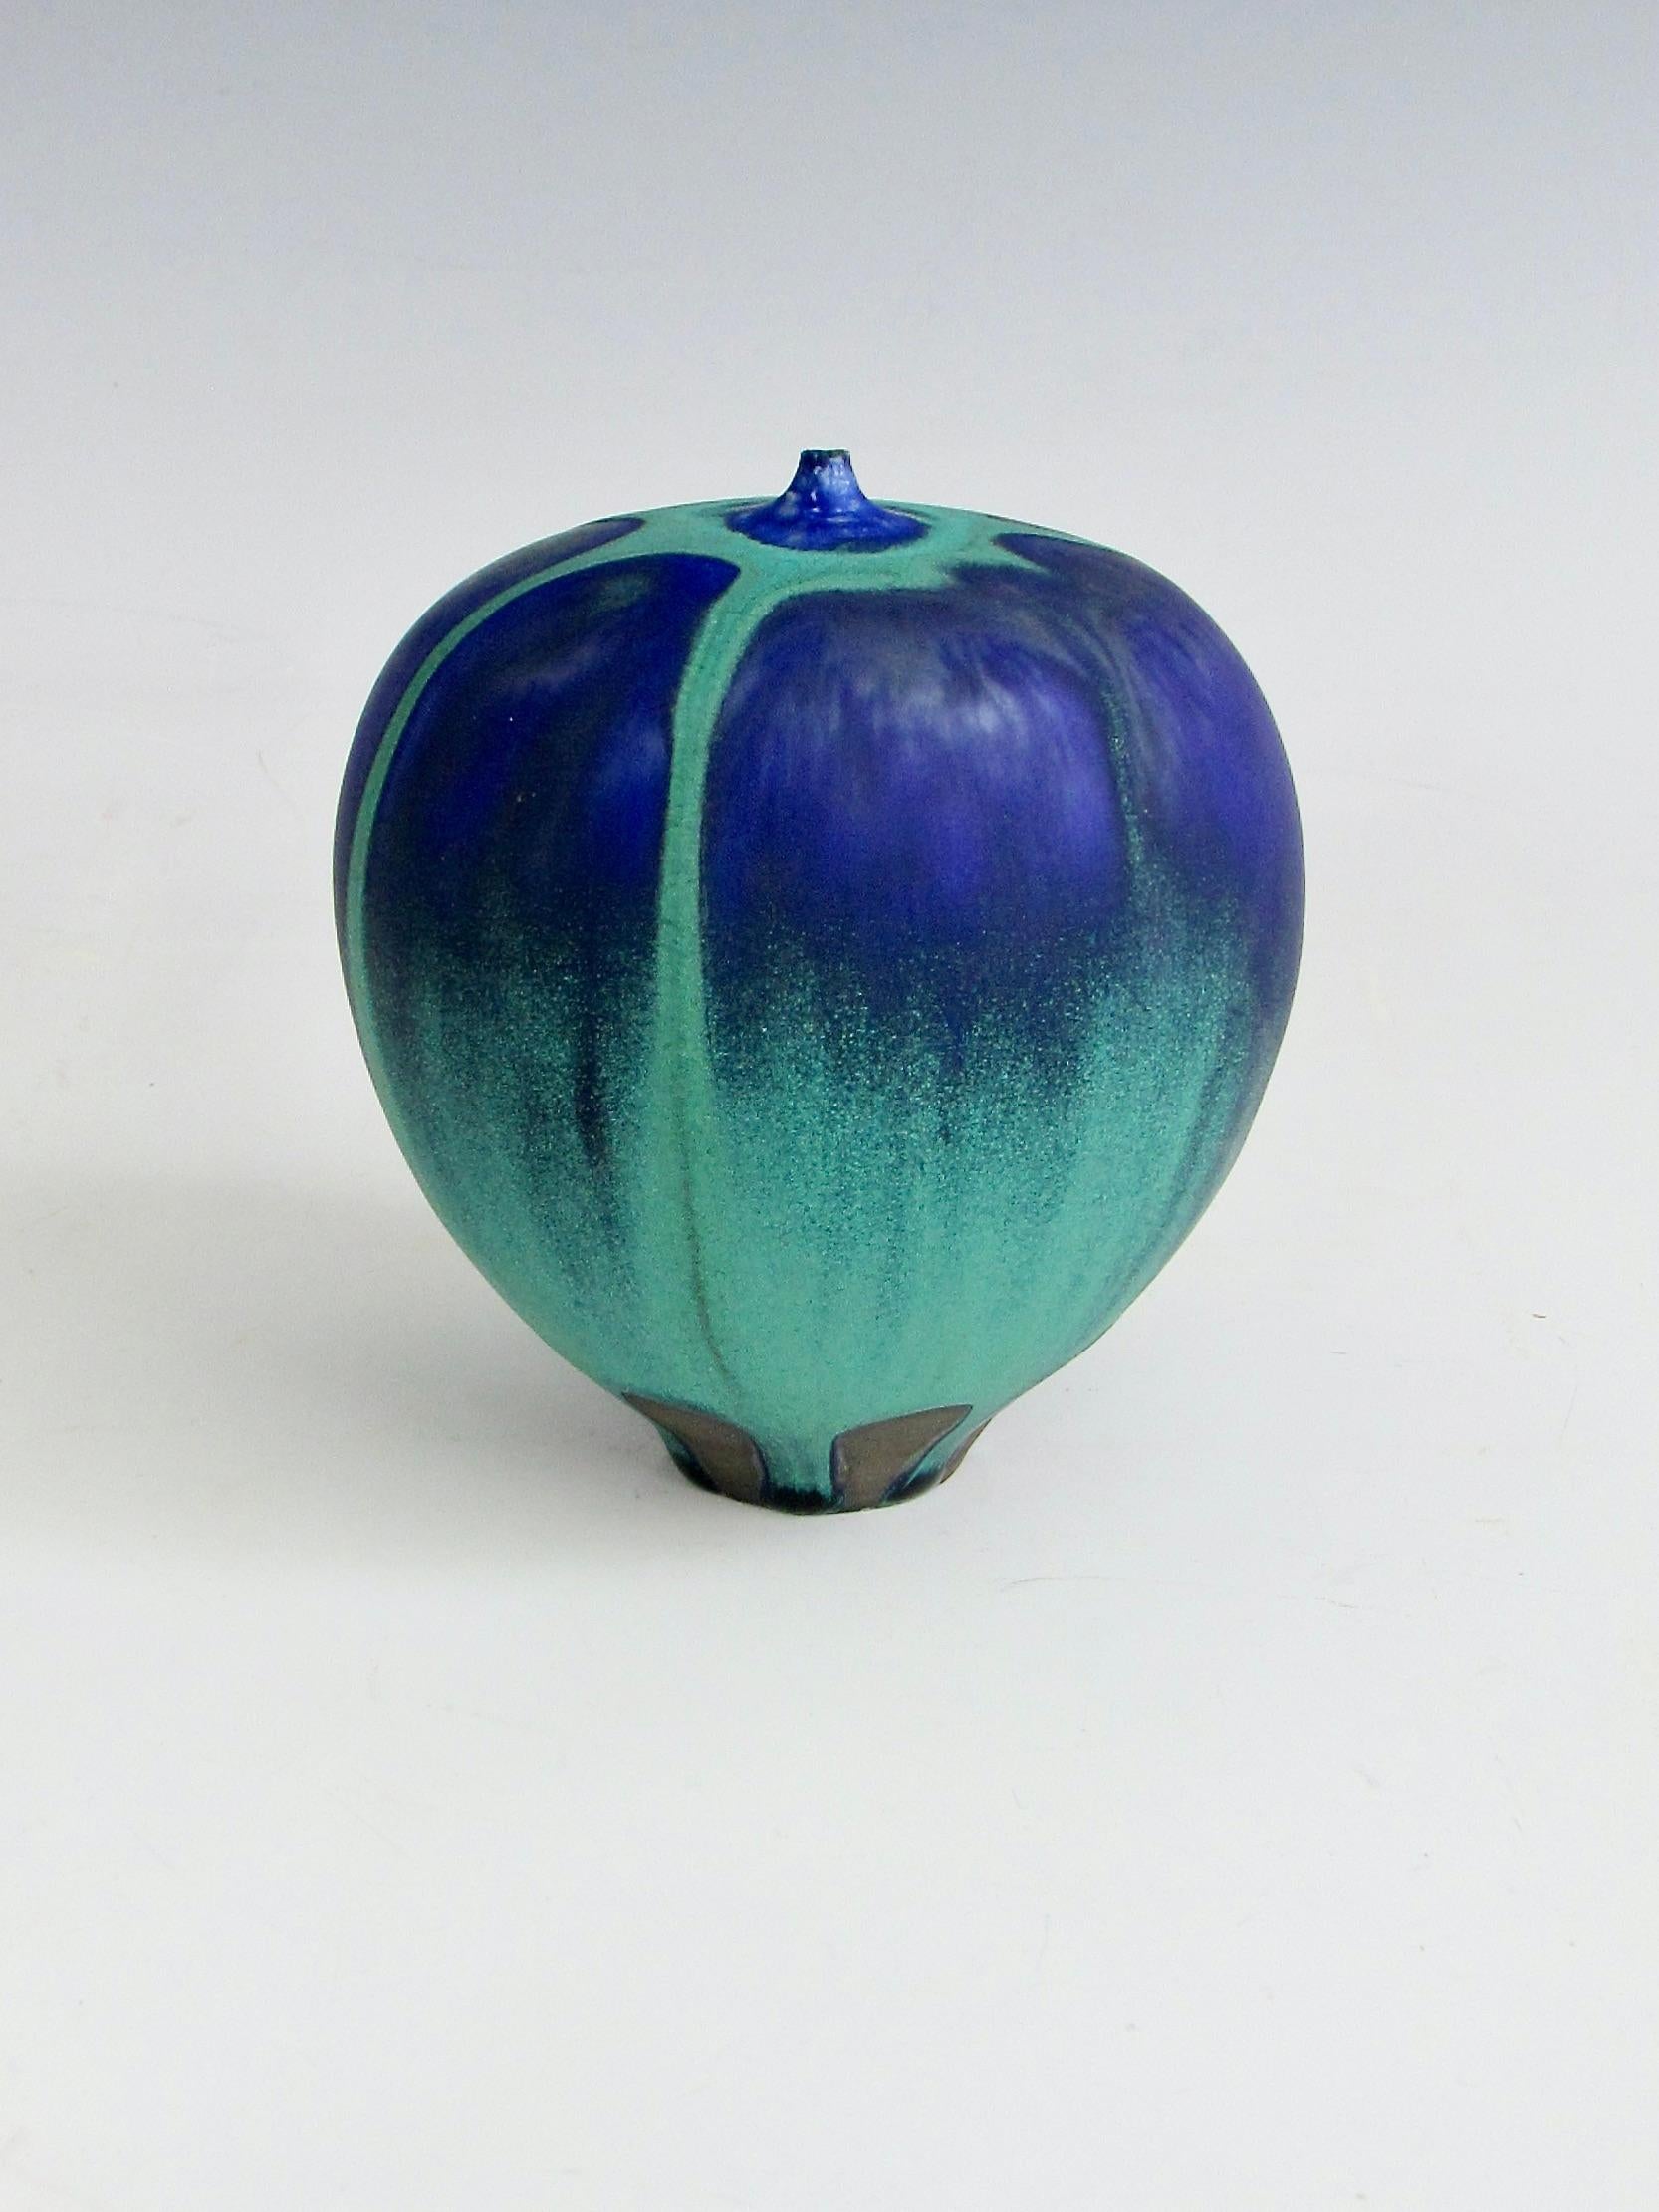 Feelie vase signed Cabat on underside . Seafoam or ocean green satin matte glaze over deep blue maybe indigo glaze also matte finish . Glazing of the green over blue brings to mind a hot air balloon . 
 Rose Cabat (1914-2015) was an American studio